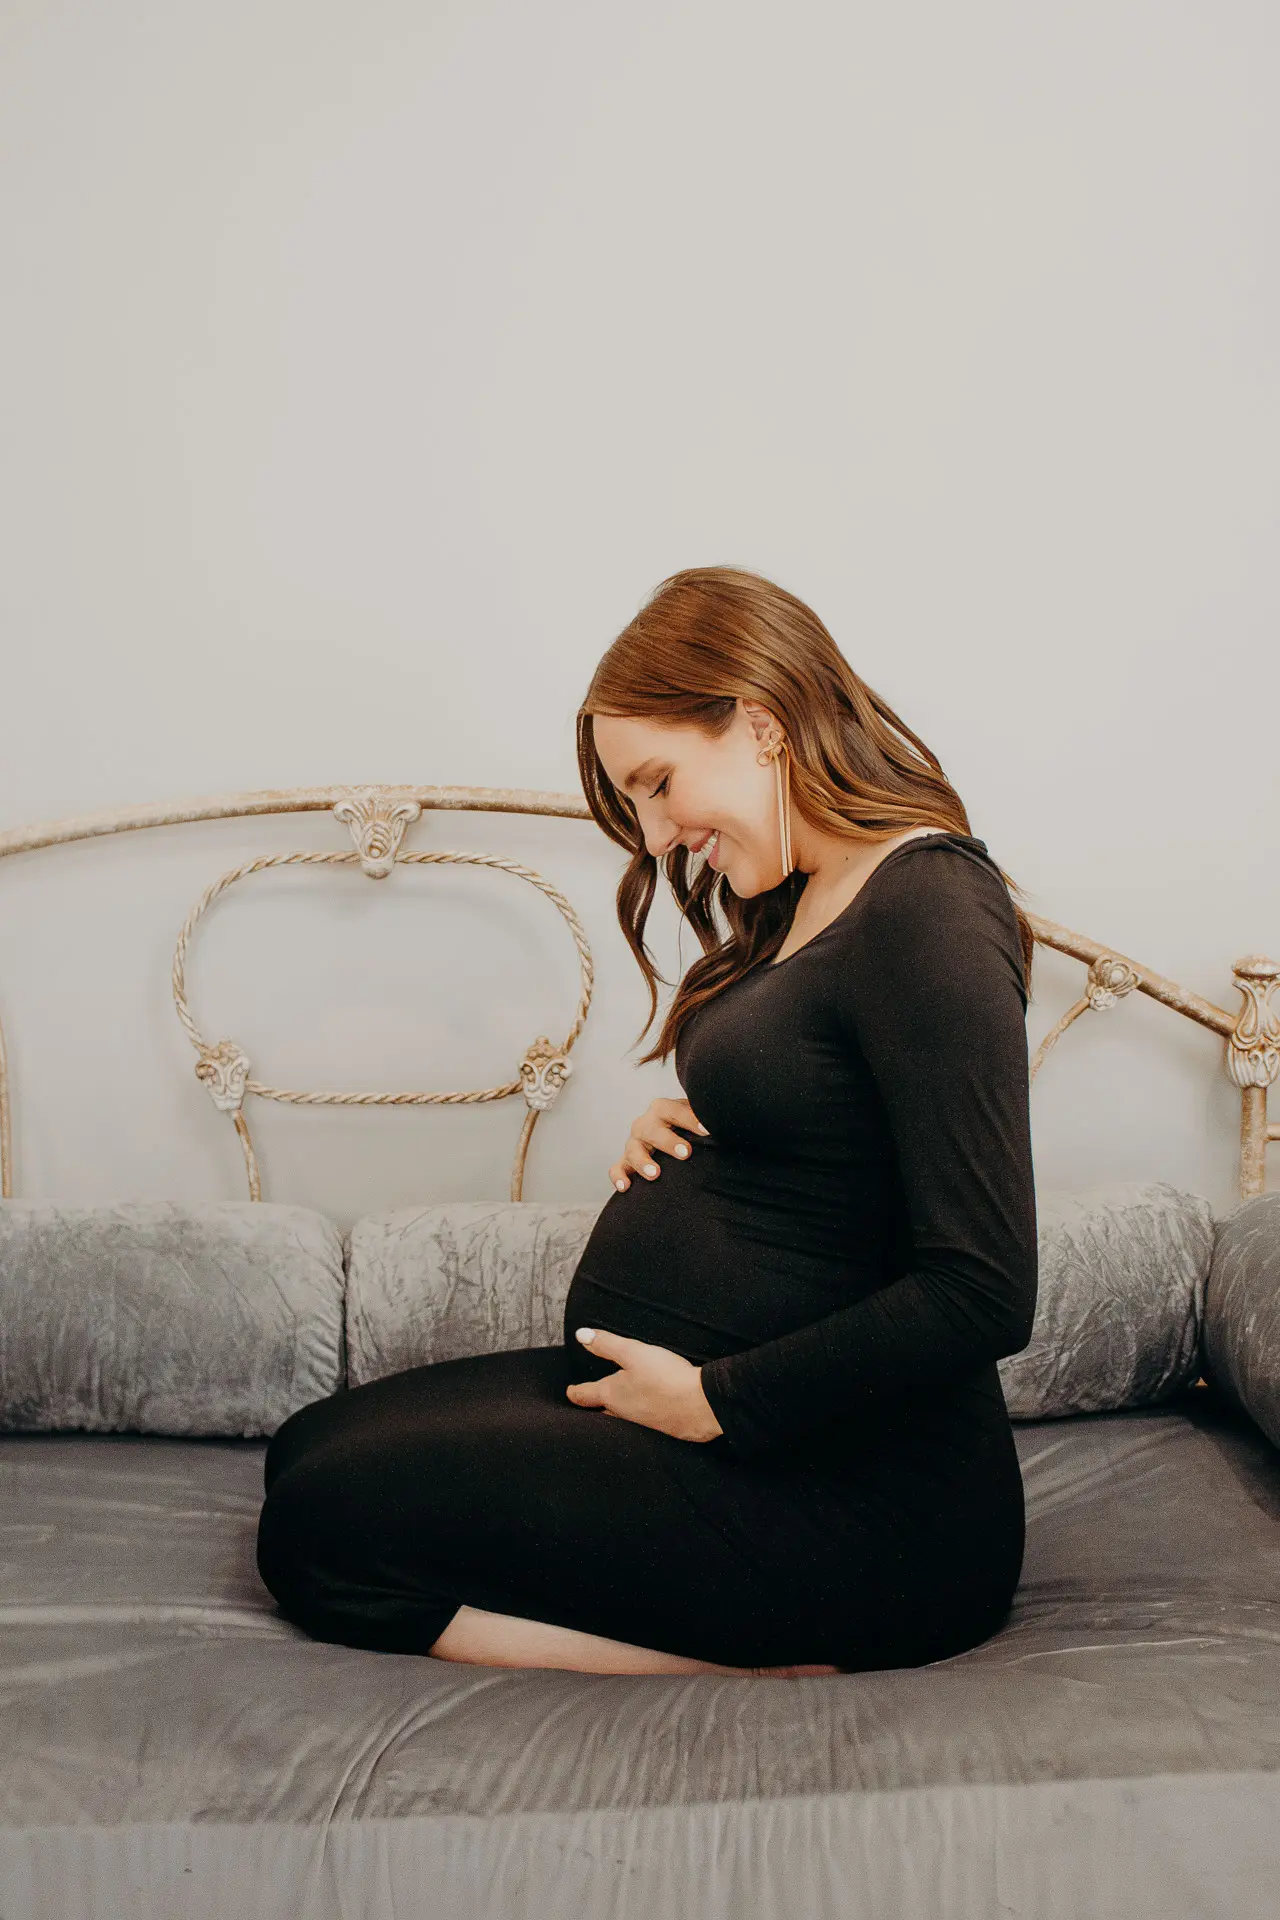 Pregnant woman in a long black dress on her knees on a bed holding her baby bump